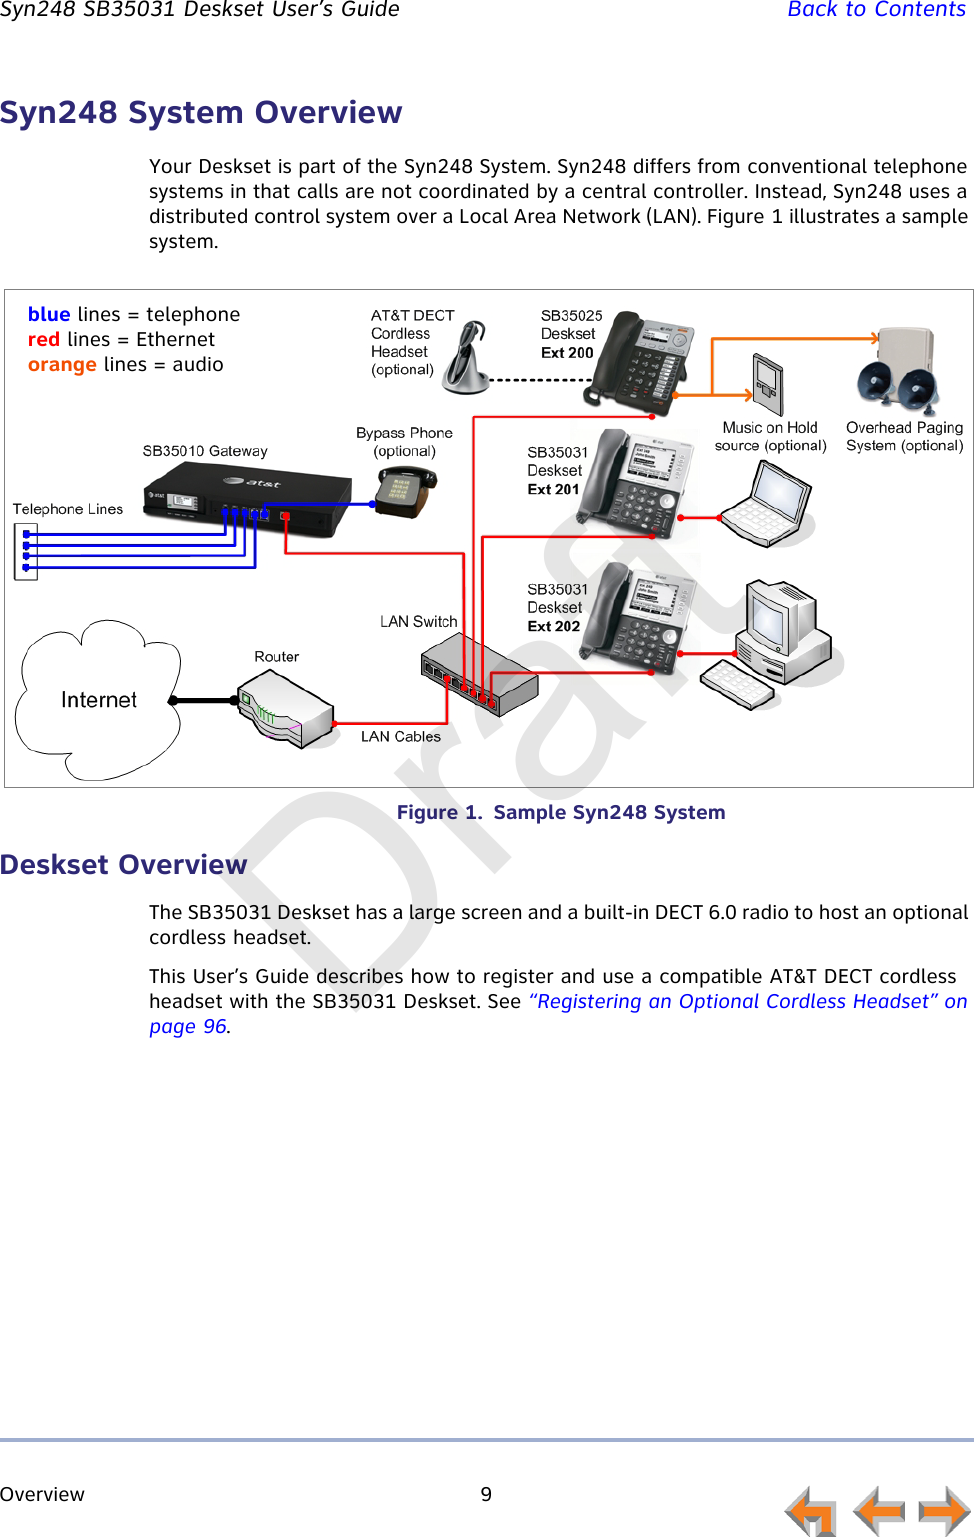 Overview 9         Syn248 SB35031 Deskset User’s Guide Back to ContentsSyn248 System OverviewYour Deskset is part of the Syn248 System. Syn248 differs from conventional telephone systems in that calls are not coordinated by a central controller. Instead, Syn248 uses a distributed control system over a Local Area Network (LAN). Figure 1 illustrates a sample system.Figure 1.  Sample Syn248 SystemDeskset OverviewThe SB35031 Deskset has a large screen and a built-in DECT 6.0 radio to host an optional cordless headset.This User’s Guide describes how to register and use a compatible AT&amp;T DECT cordless headset with the SB35031 Deskset. See “Registering an Optional Cordless Headset” on page 96.blue lines = telephonered lines = Ethernet orange lines = audioDraft